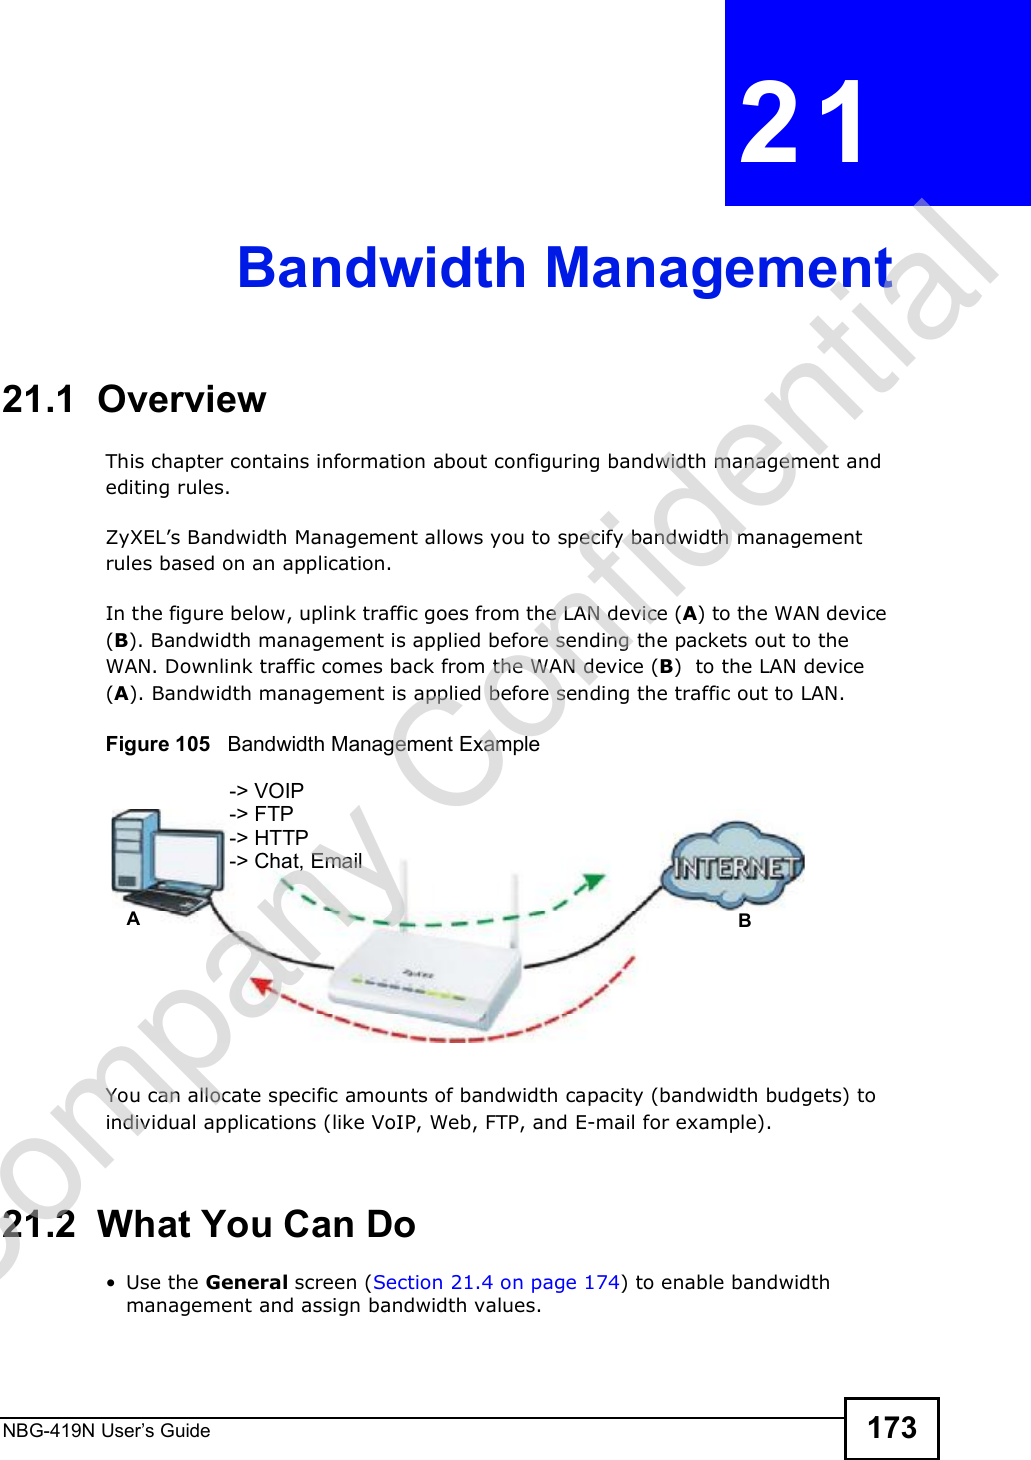 NBG-419N User s Guide 173CHAPTER  21 Bandwidth Management21.1  Overview This chapter contains information about configuring bandwidth management and editing rules.ZyXEL!s Bandwidth Management allows you to specify bandwidth management rules based on an application. In the figure below, uplink traffic goes from the LAN device (A) to the WAN device (B). Bandwidth management is applied before sending the packets out to the WAN. Downlink traffic comes back from the WAN device (B)  to the LAN device (A). Bandwidth management is applied before sending the traffic out to LAN.Figure 105   Bandwidth Management ExampleYou can allocate specific amounts of bandwidth capacity (bandwidth budgets) to individual applications (like VoIP, Web, FTP, and E-mail for example).21.2  What You Can Do Use the General screen (Section 21.4 on page 174) to enable bandwidth management and assign bandwidth values.AB-&gt; VOIP-&gt; FTP-&gt; HTTP-&gt; Chat, EmailCompany Confidential